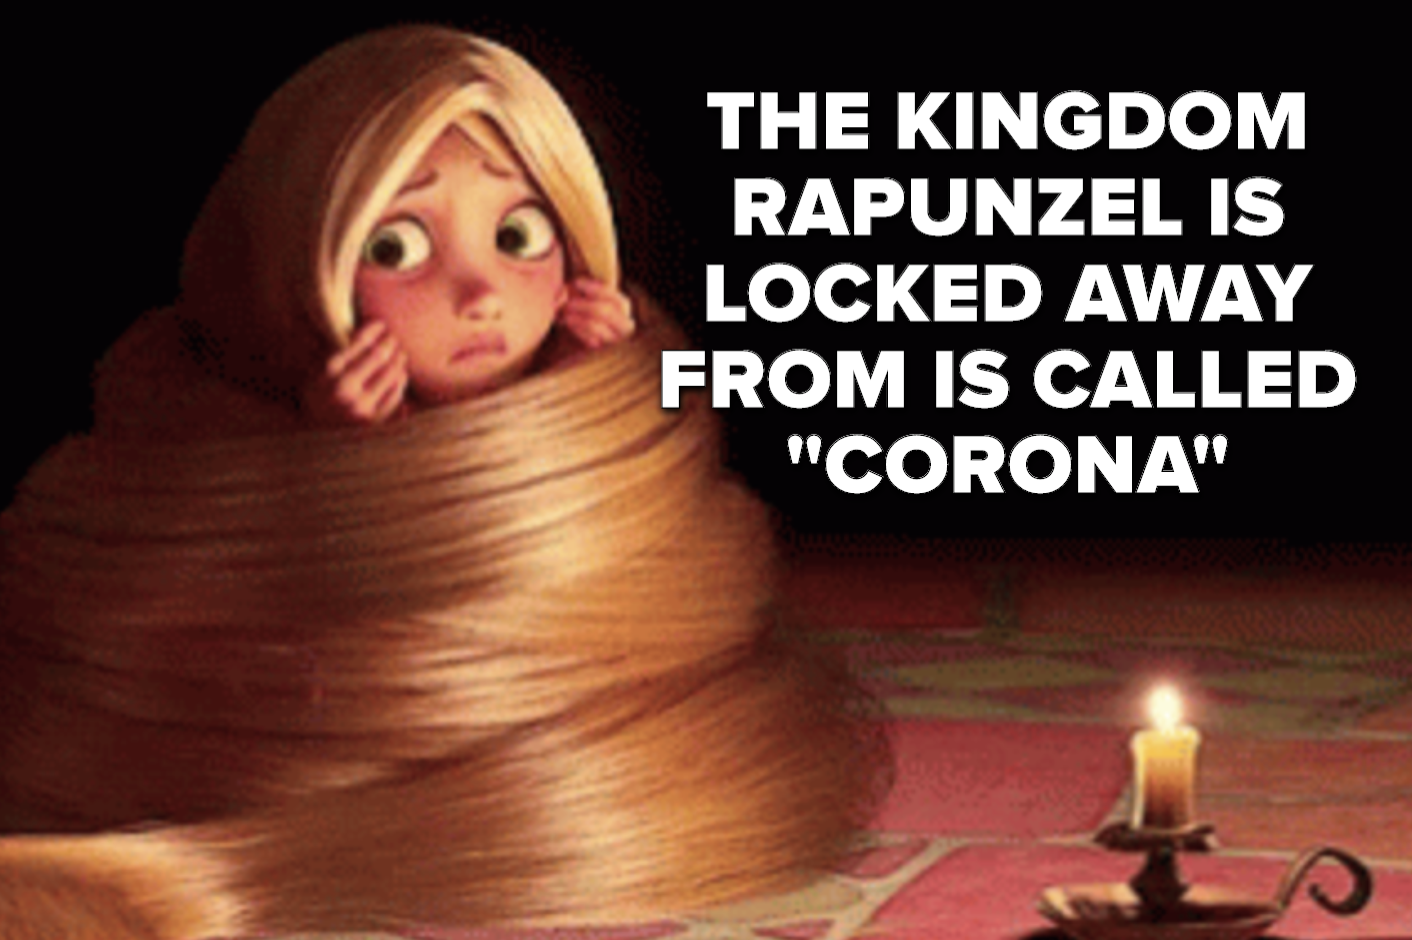 the name of the kingdom in tangled